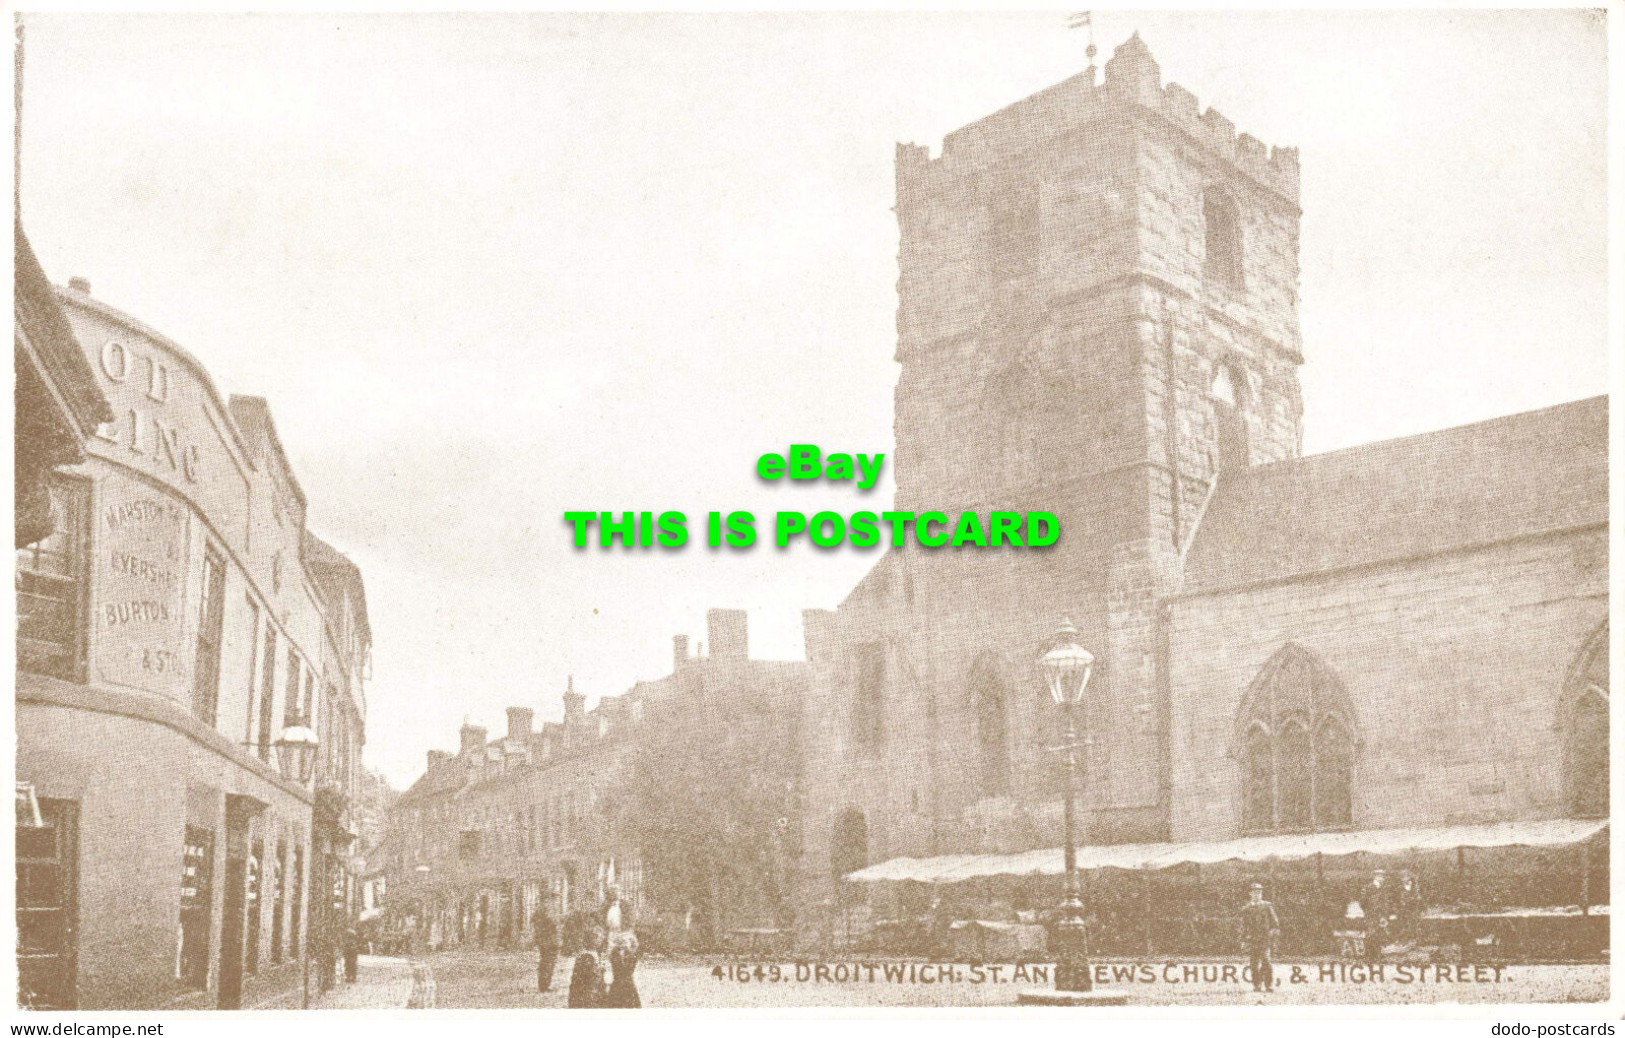 R571484 41649. Droitwich. St. Andrews Church And High Street. Droitwich Civic So - World